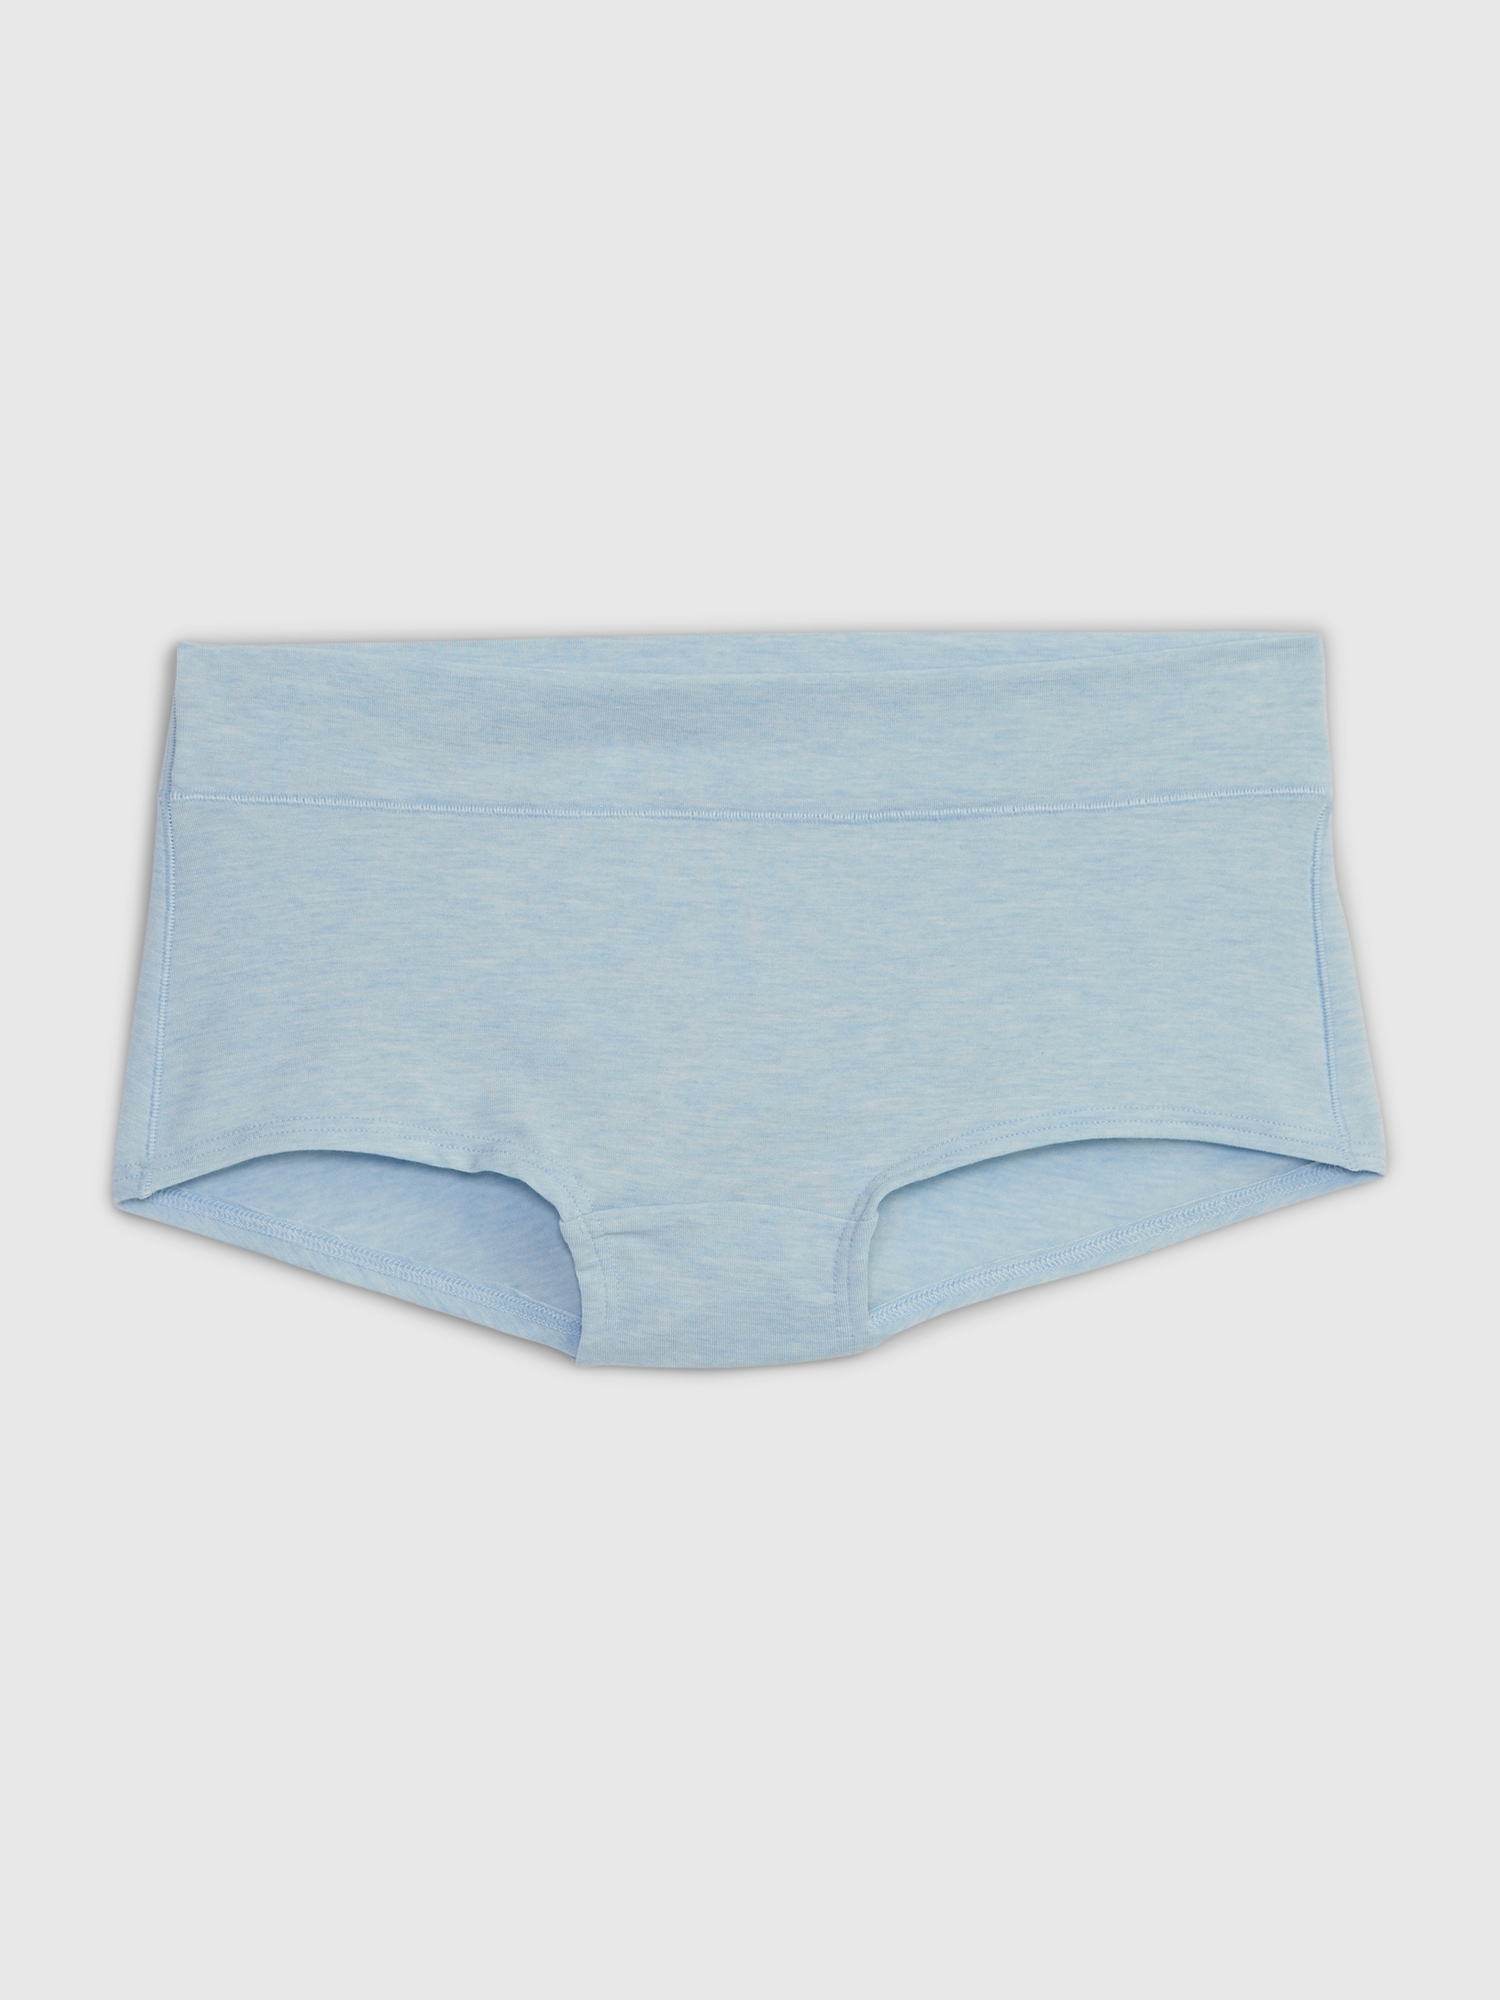 27 Cute And Comfy Pairs Of Undies Under $10 You'll Be So Glad You